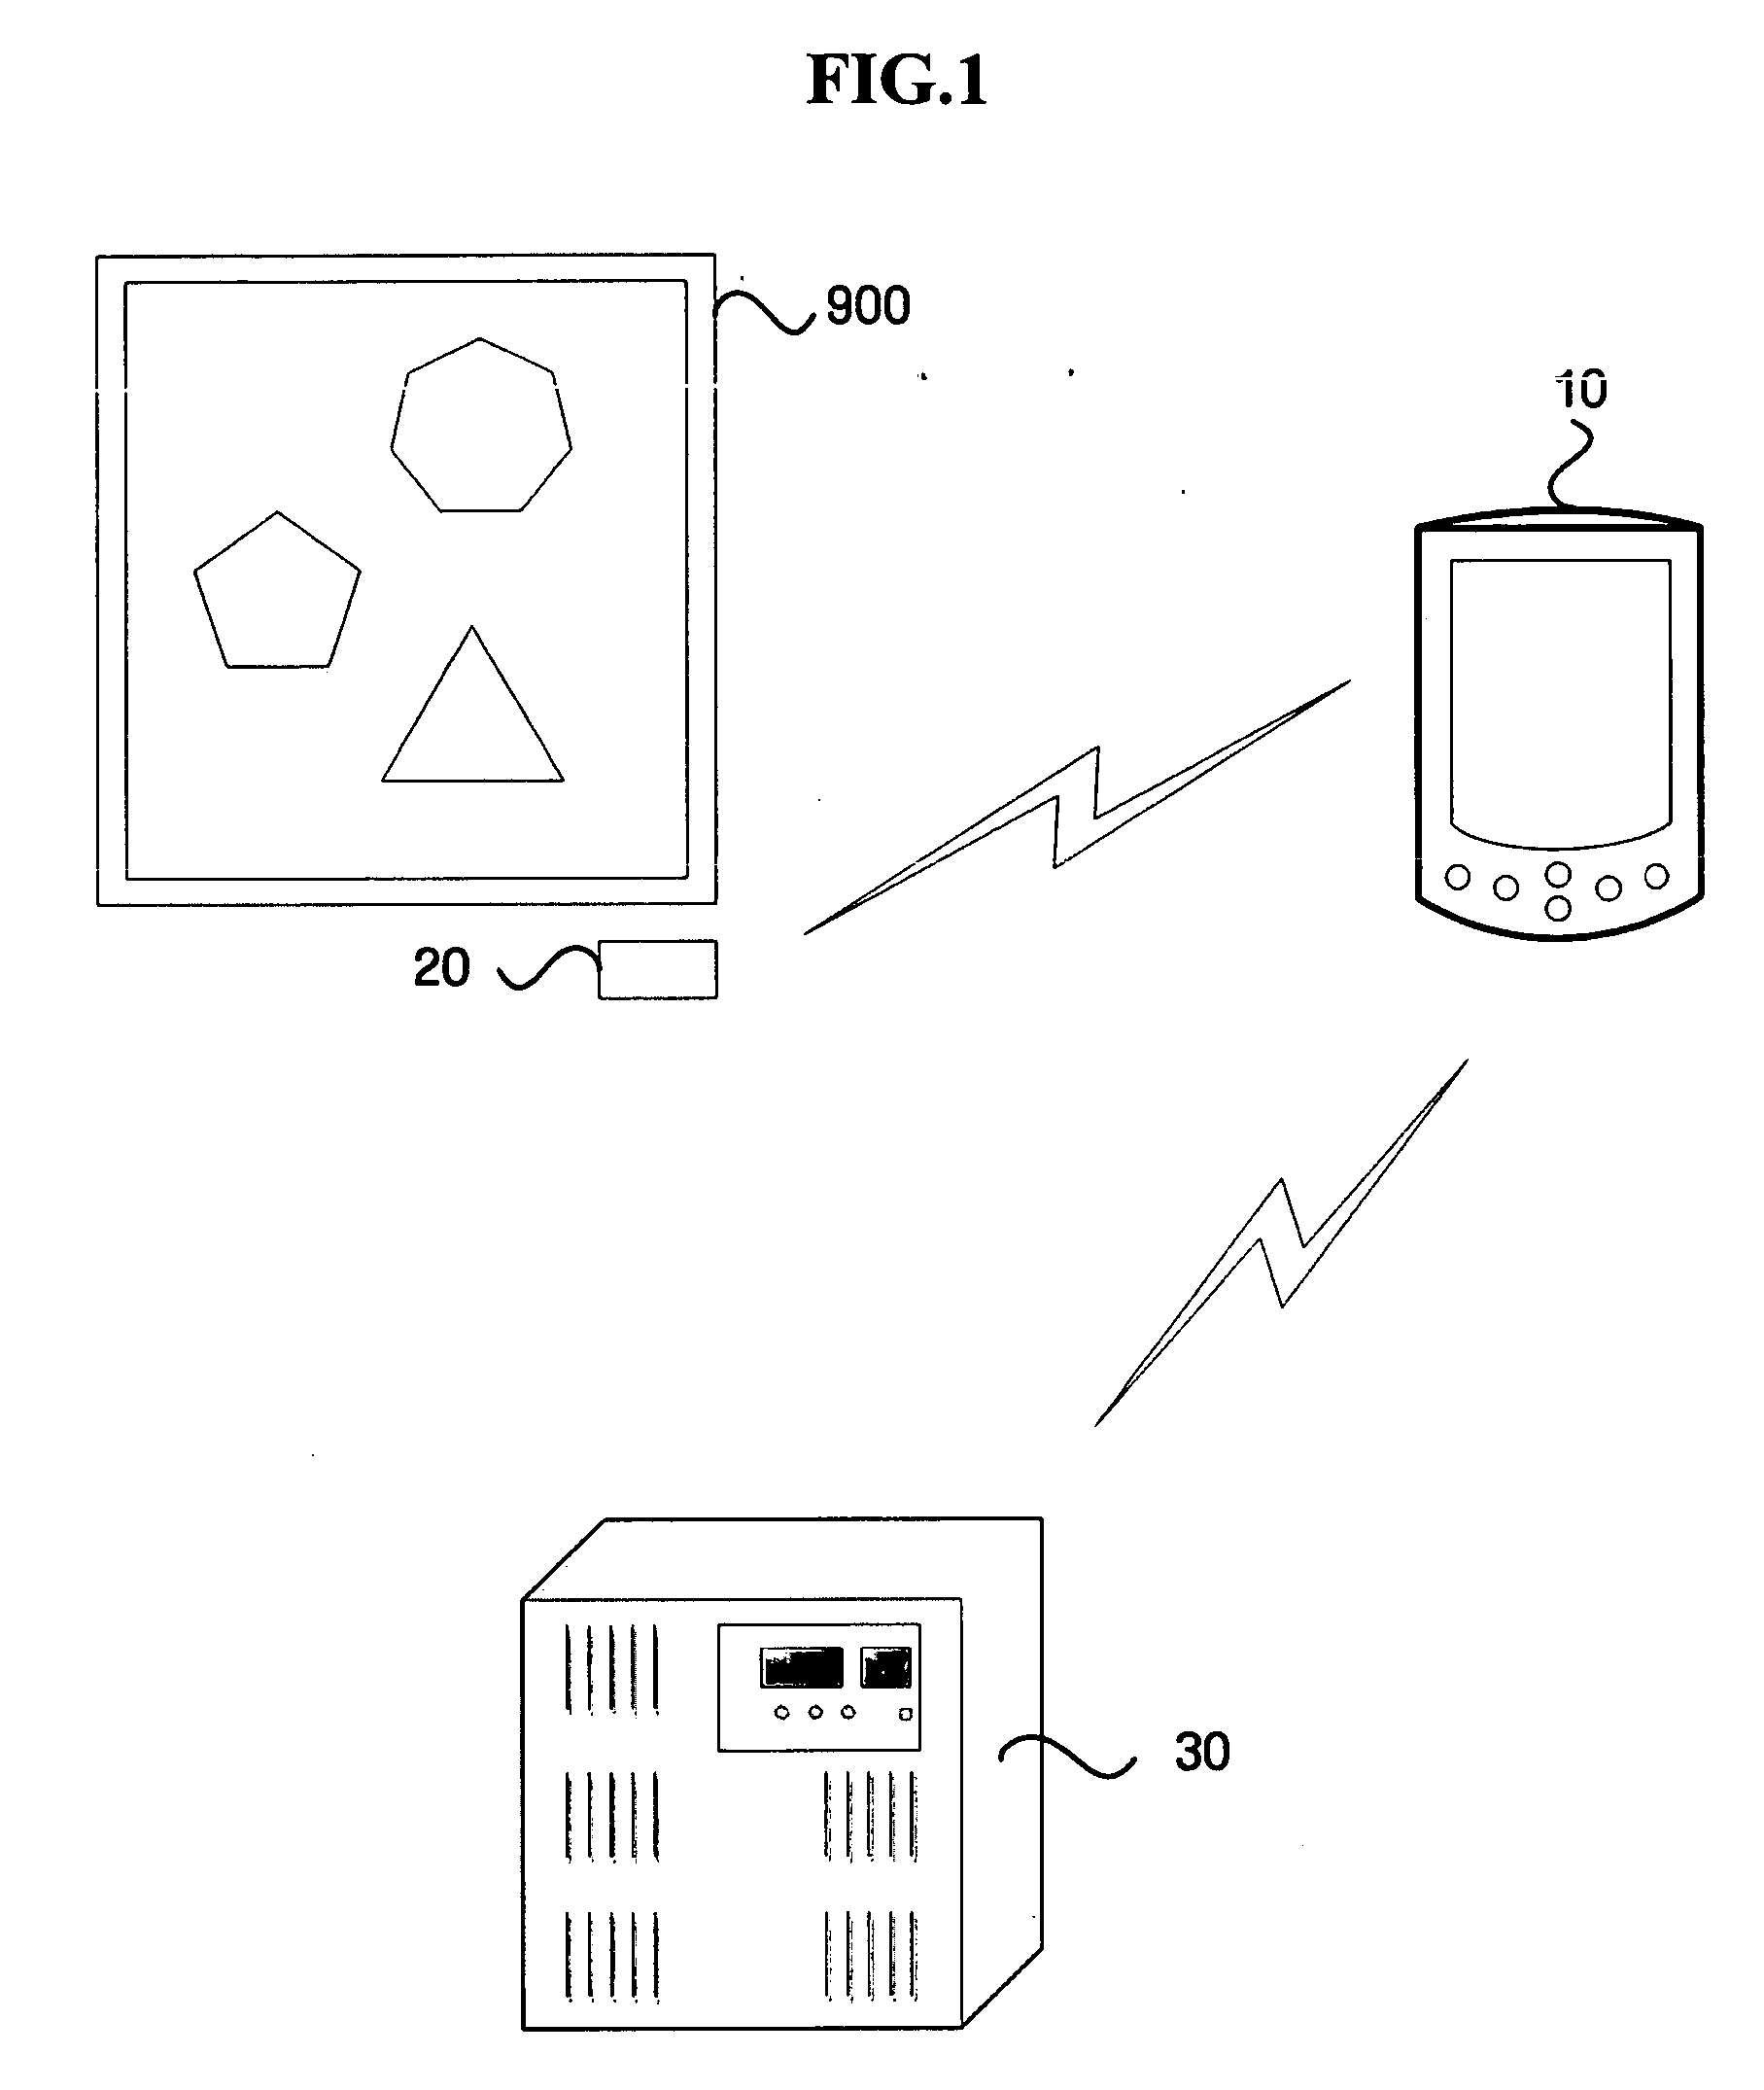 Method, system and portable device for real-time provision of gallery guide and exhibit information